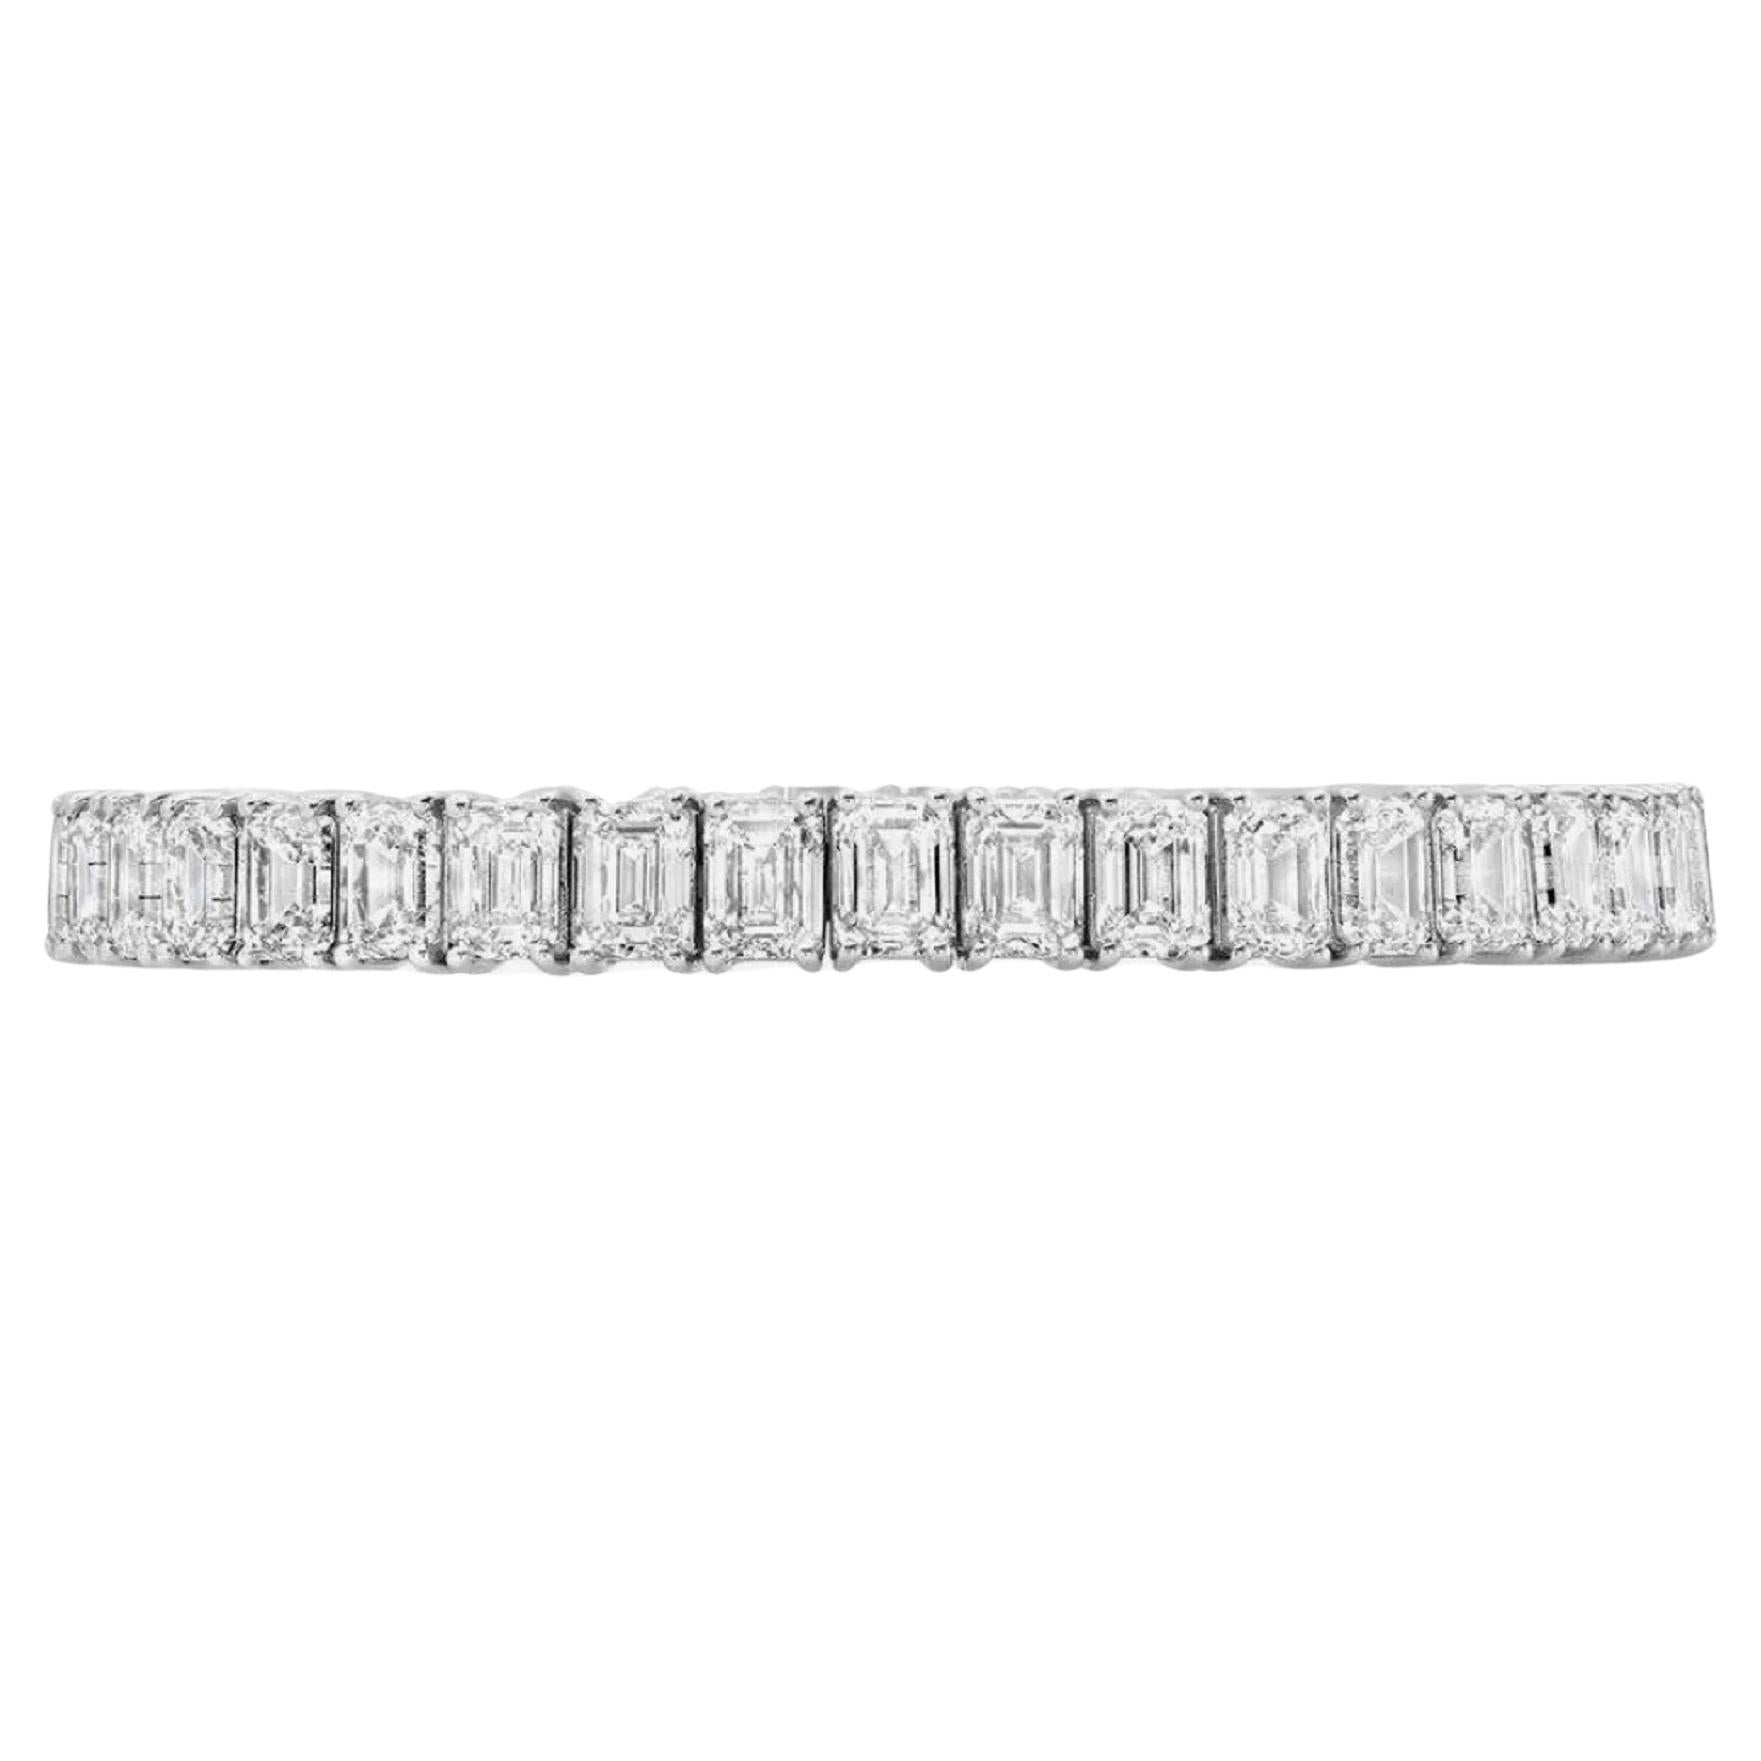 Natural Emerald Cut Diamond Straight Line Tennis Bracelet. 

11.85 ct total weight 14K White Gold Natural Emerald Cut Diamond Straight Line Tennis Bracelet. 

The bracelet weighs 12.8 grams, 7.25 inches in length, there are 59 Natural Emerald Cut